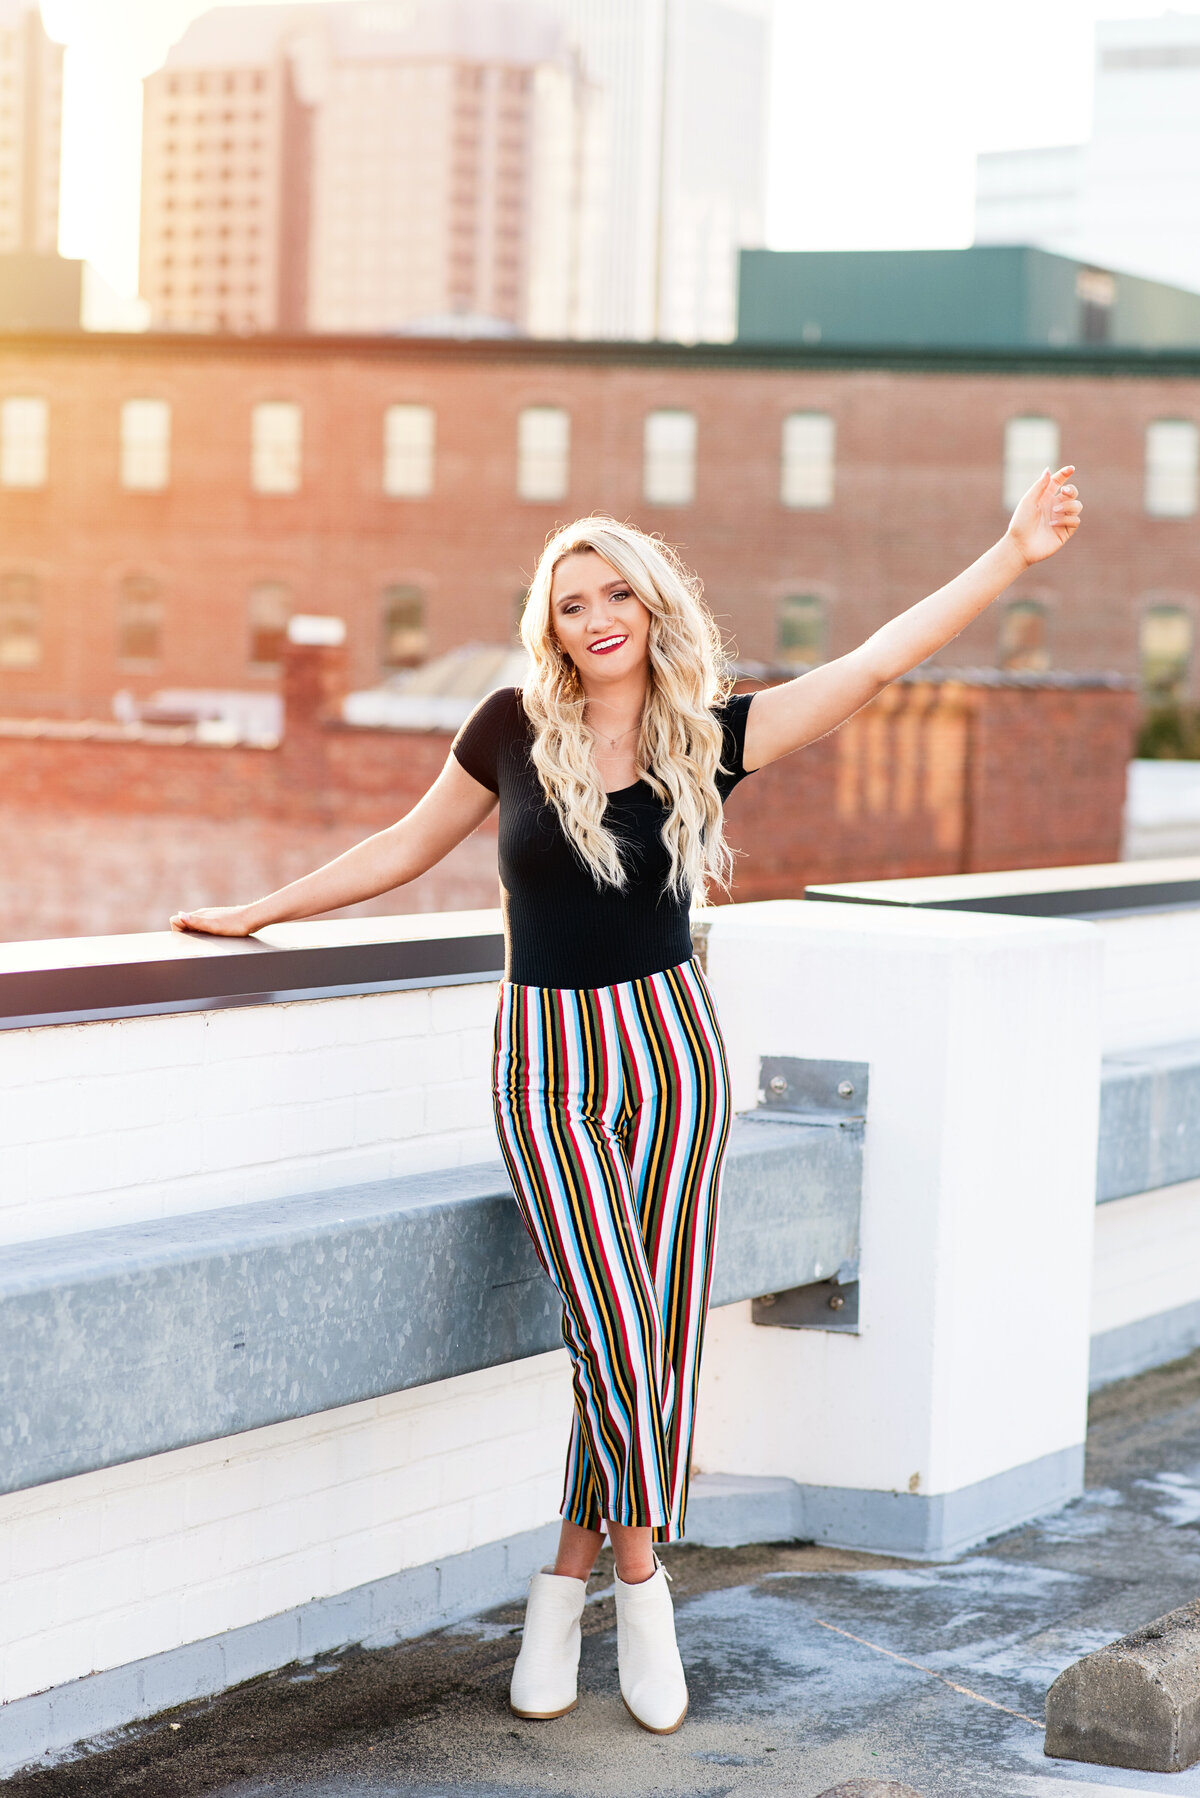 Clover Hill high school girl wearing striped pants waves during her sunset portrait session on a rooftop downtown Richmond, VA.